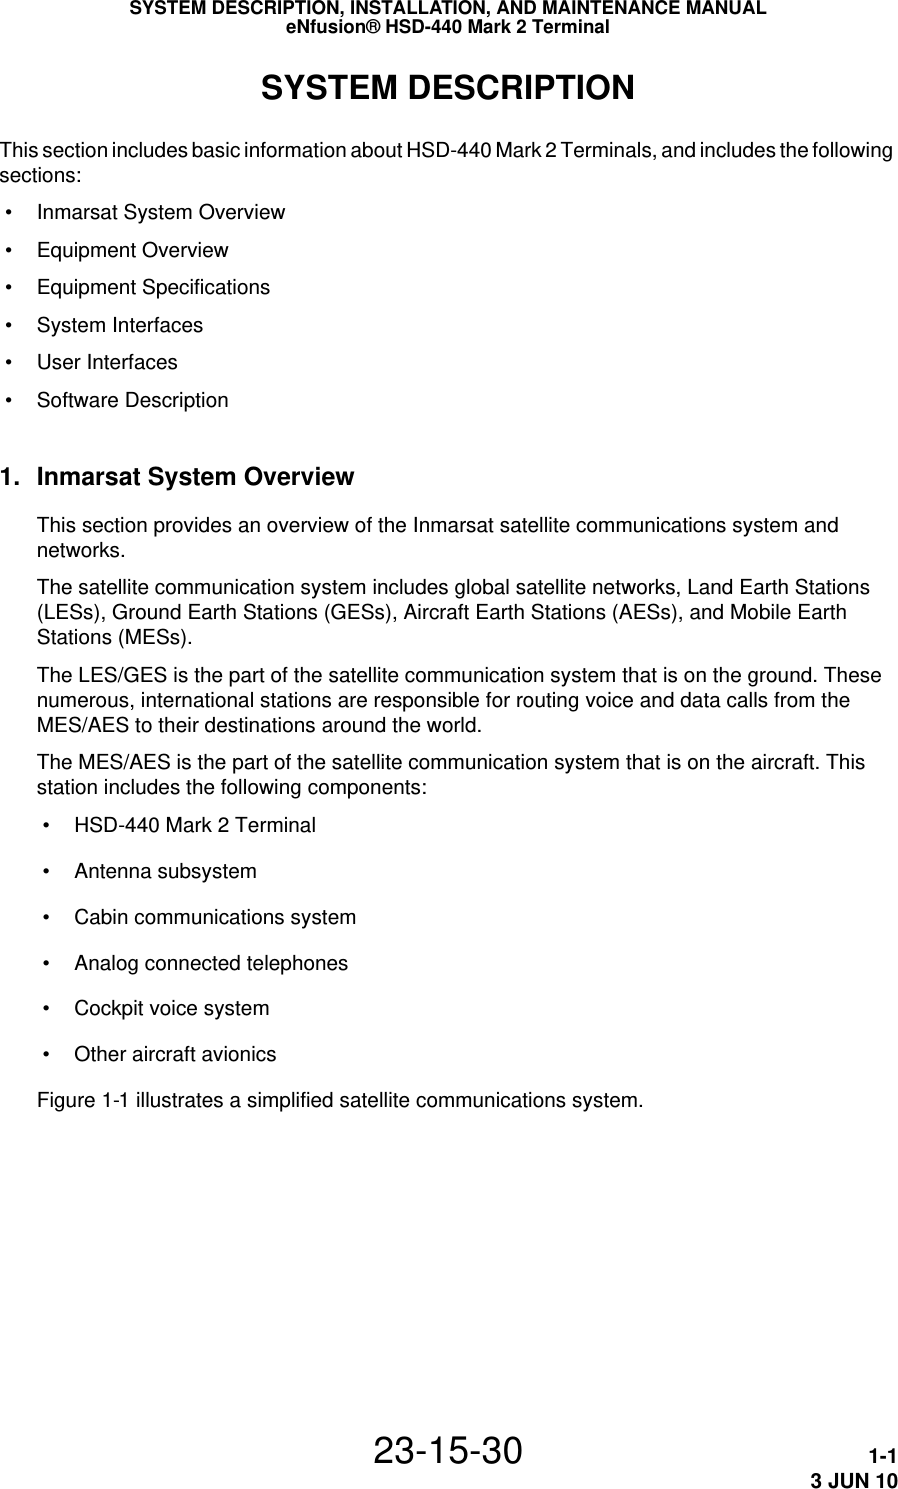 SYSTEM DESCRIPTION, INSTALLATION, AND MAINTENANCE MANUALeNfusion® HSD-440 Mark 2 Terminal23-15-30 1-13 JUN 10SYSTEM DESCRIPTIONThis section includes basic information about HSD-440 Mark 2 Terminals, and includes the following sections: • Inmarsat System Overview • Equipment Overview • Equipment Specifications • System Interfaces • User Interfaces • Software Description1. Inmarsat System OverviewThis section provides an overview of the Inmarsat satellite communications system and networks.The satellite communication system includes global satellite networks, Land Earth Stations (LESs), Ground Earth Stations (GESs), Aircraft Earth Stations (AESs), and Mobile Earth Stations (MESs).The LES/GES is the part of the satellite communication system that is on the ground. These numerous, international stations are responsible for routing voice and data calls from the MES/AES to their destinations around the world. The MES/AES is the part of the satellite communication system that is on the aircraft. This station includes the following components: • HSD-440 Mark 2 Terminal • Antenna subsystem • Cabin communications system • Analog connected telephones • Cockpit voice system • Other aircraft avionicsFigure 1-1 illustrates a simplified satellite communications system.